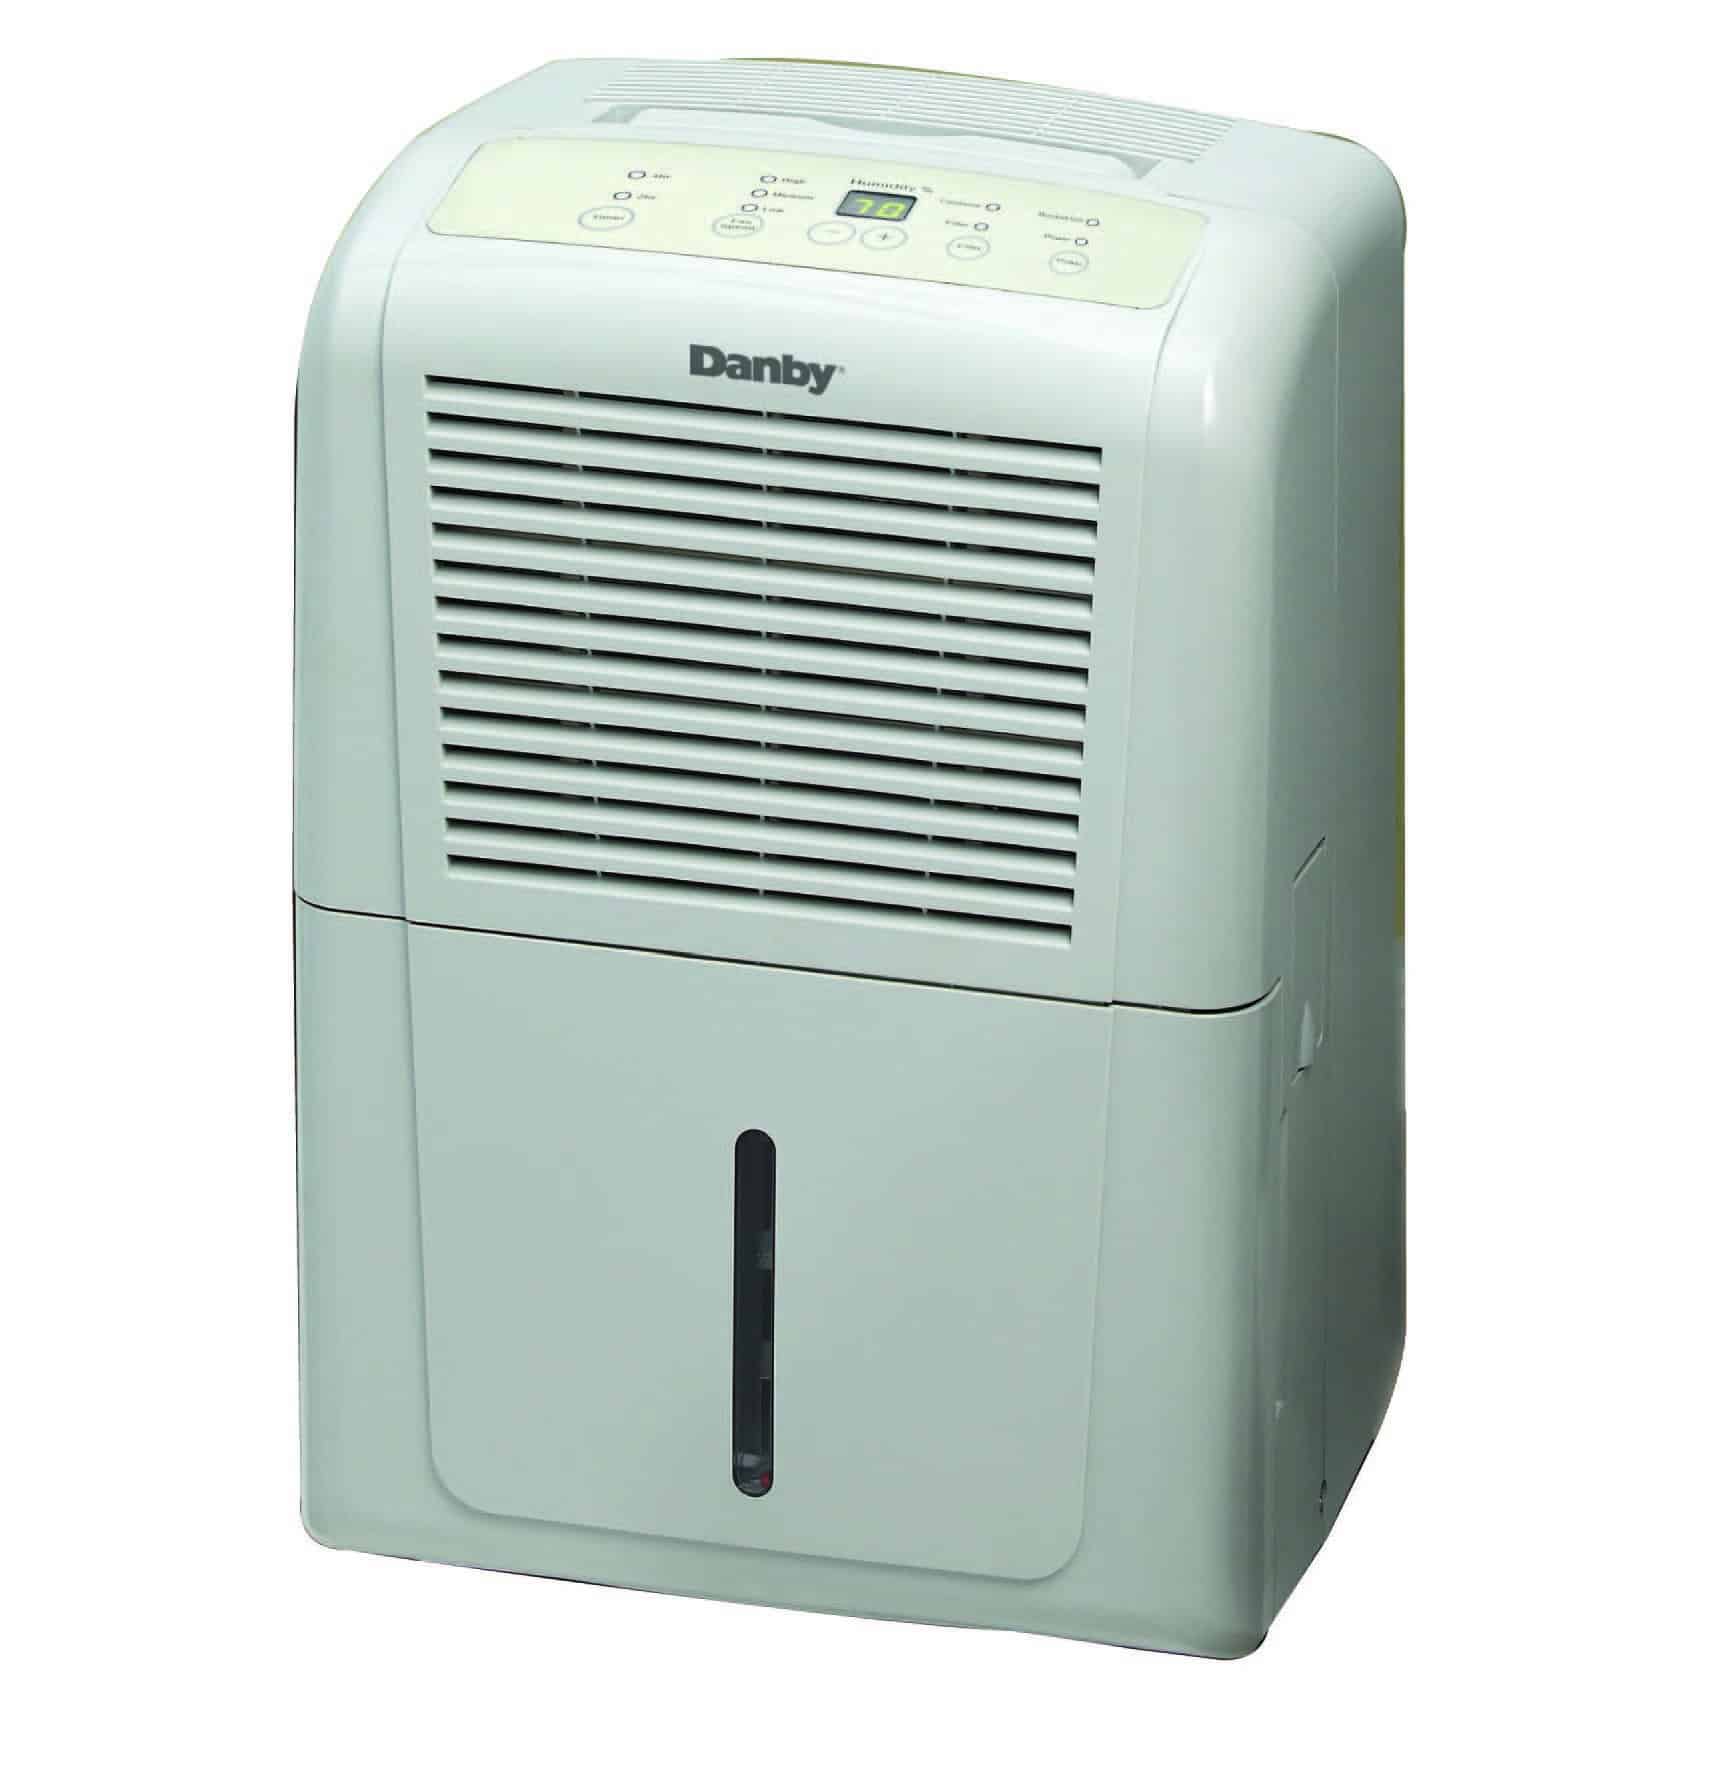 Over 1.5 Million Dehumidifiers Recalled After 23 Fires Reported